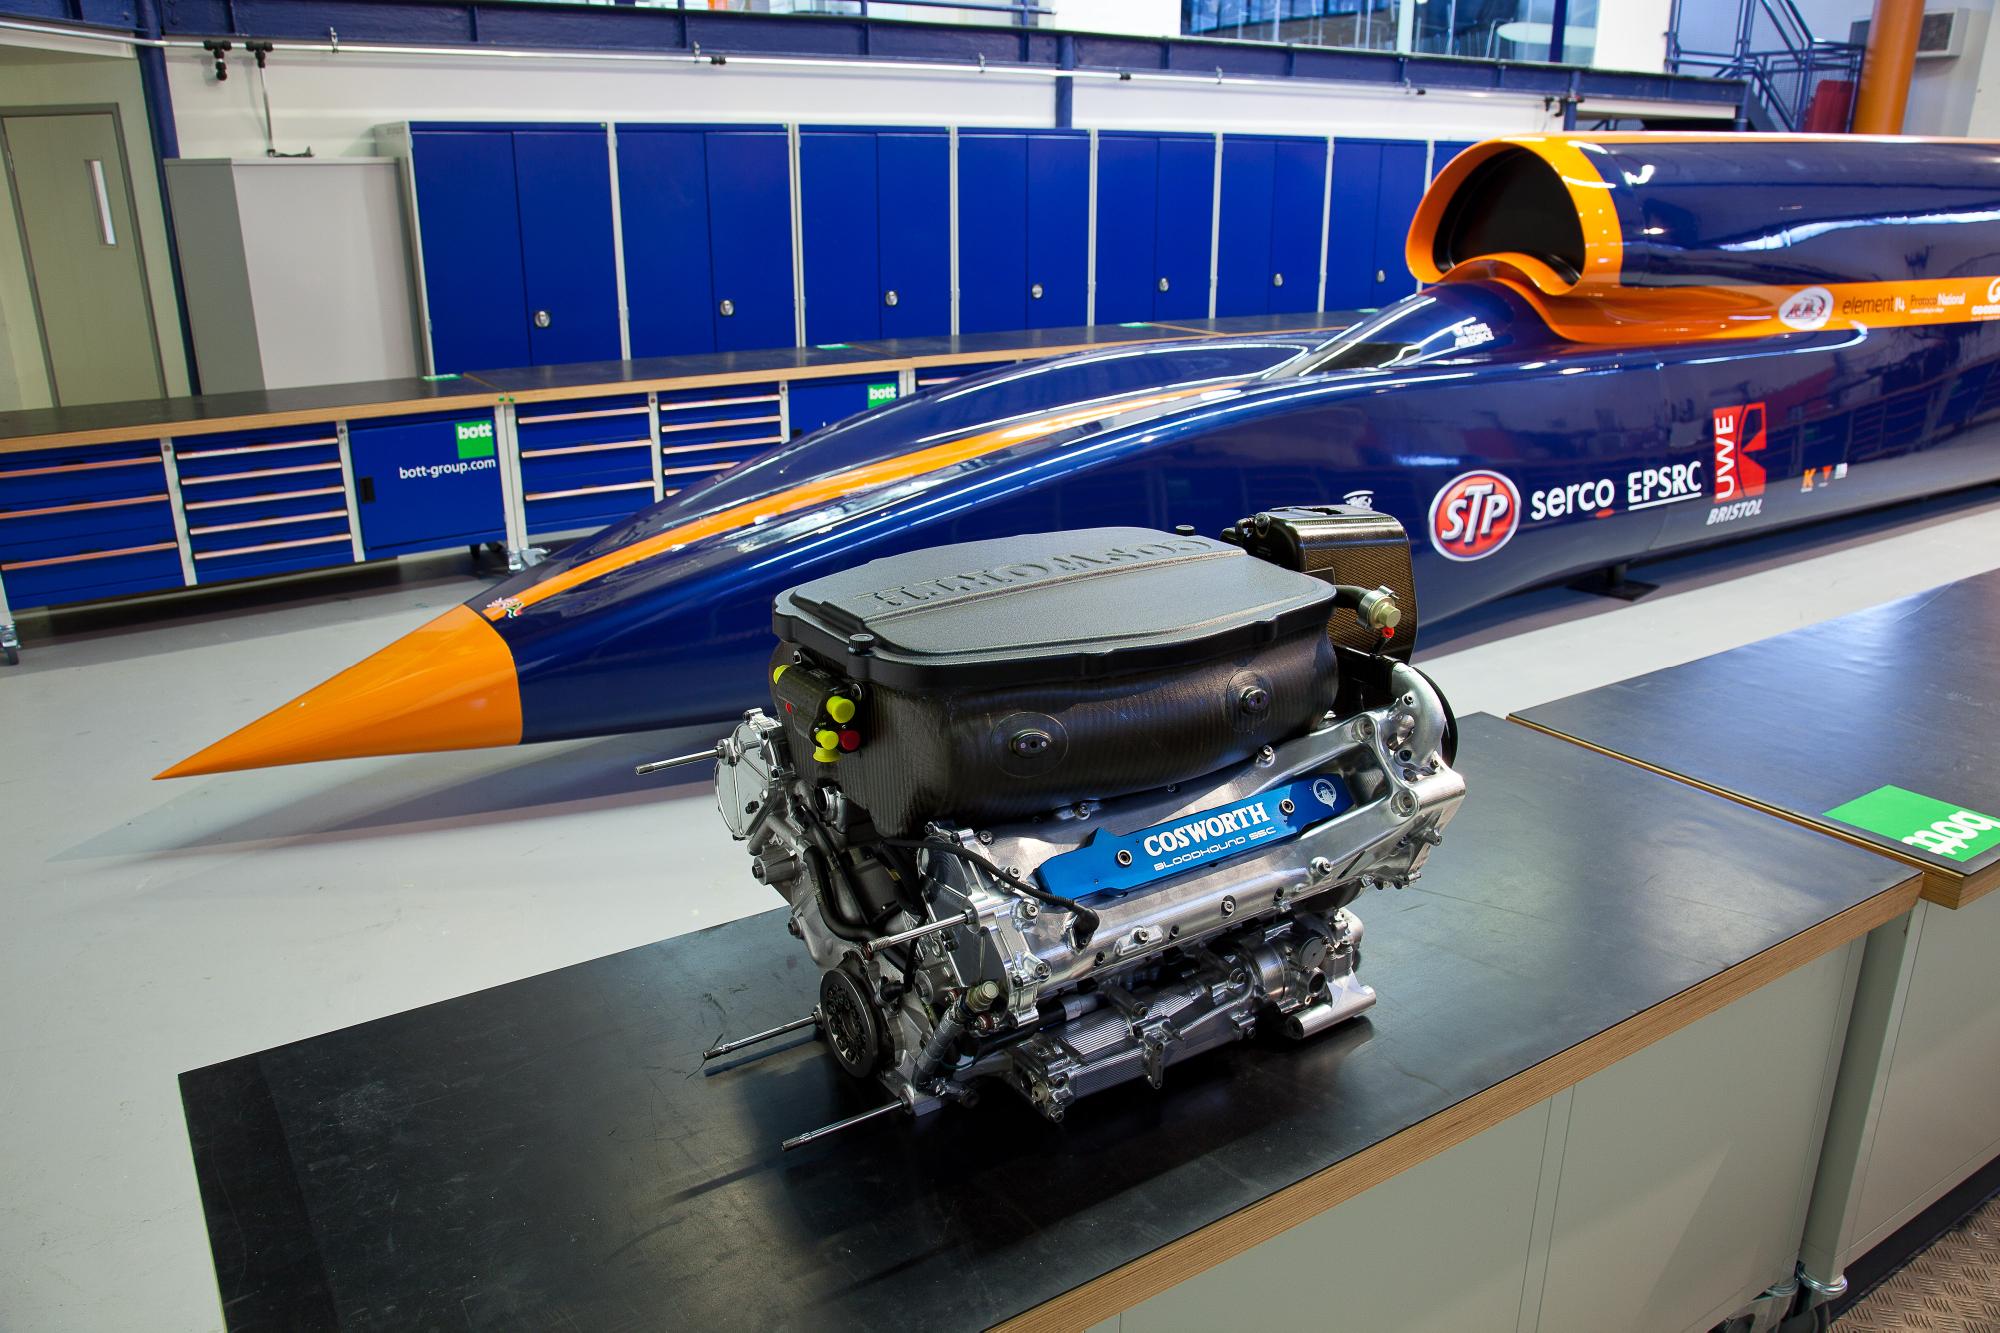 The Cosworth CA2010 F1 race engine alongside the full size BLOODHOUND SSC Show Car. Photograph by Flow Images